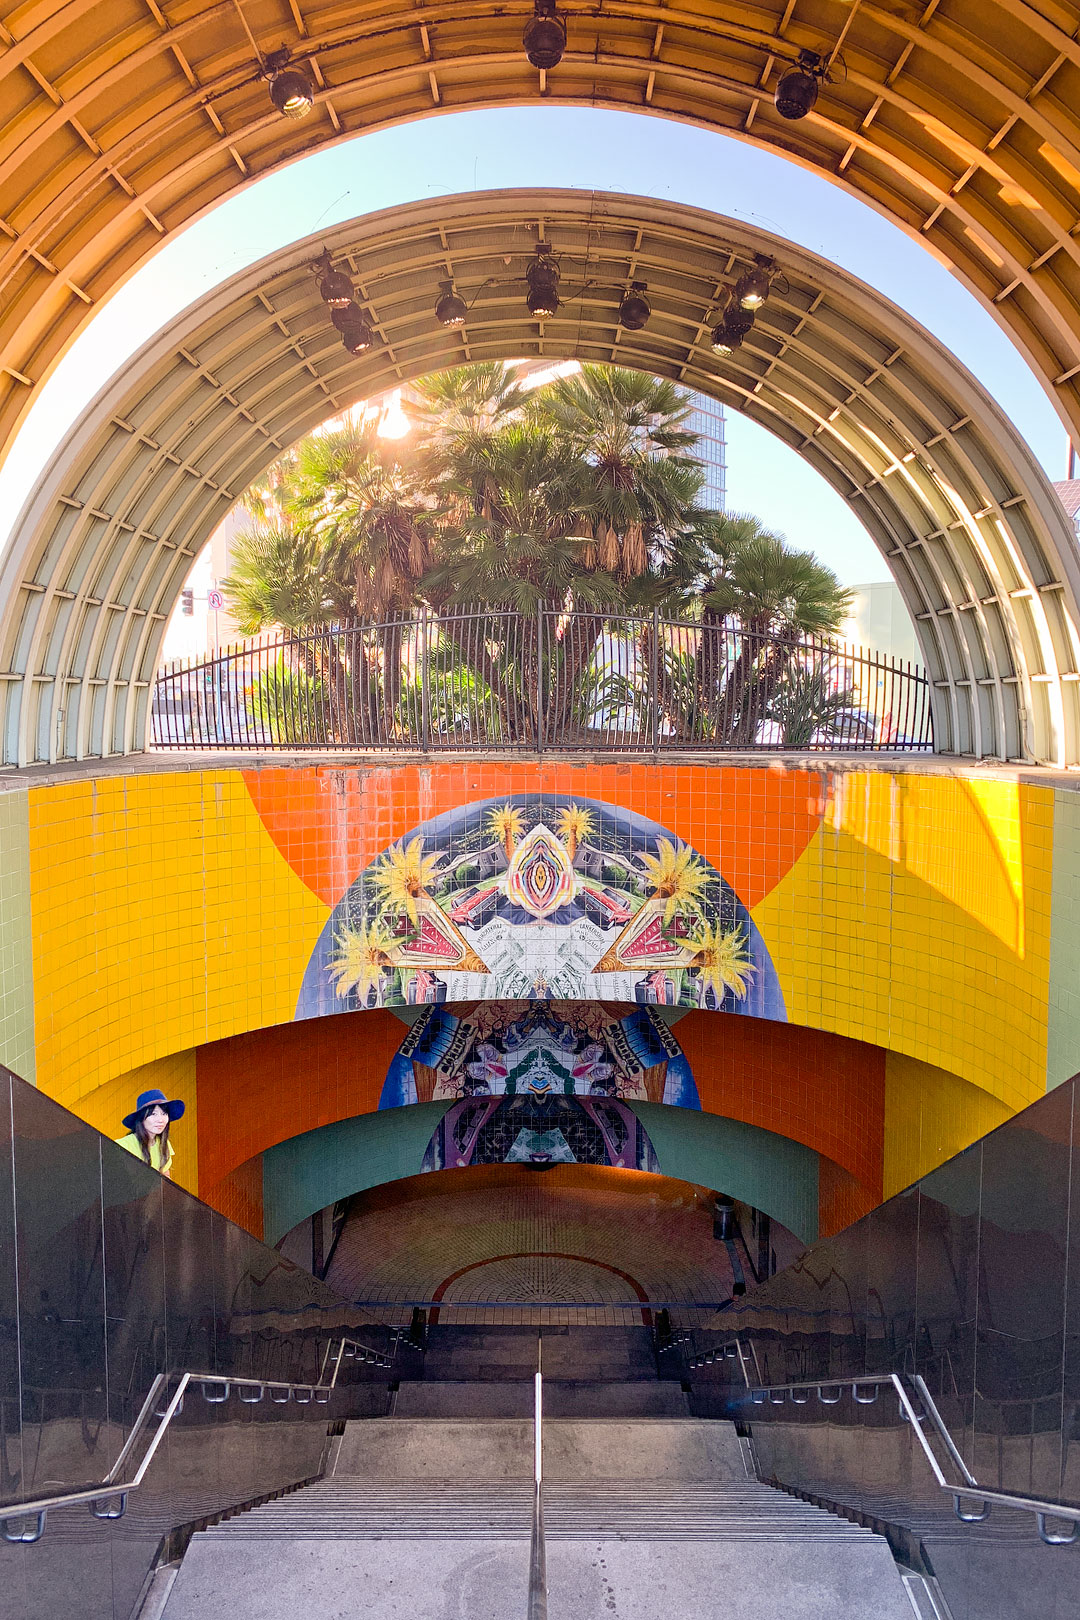 North Hollywood Station + 27 LA Instagram Spots You Can't Miss